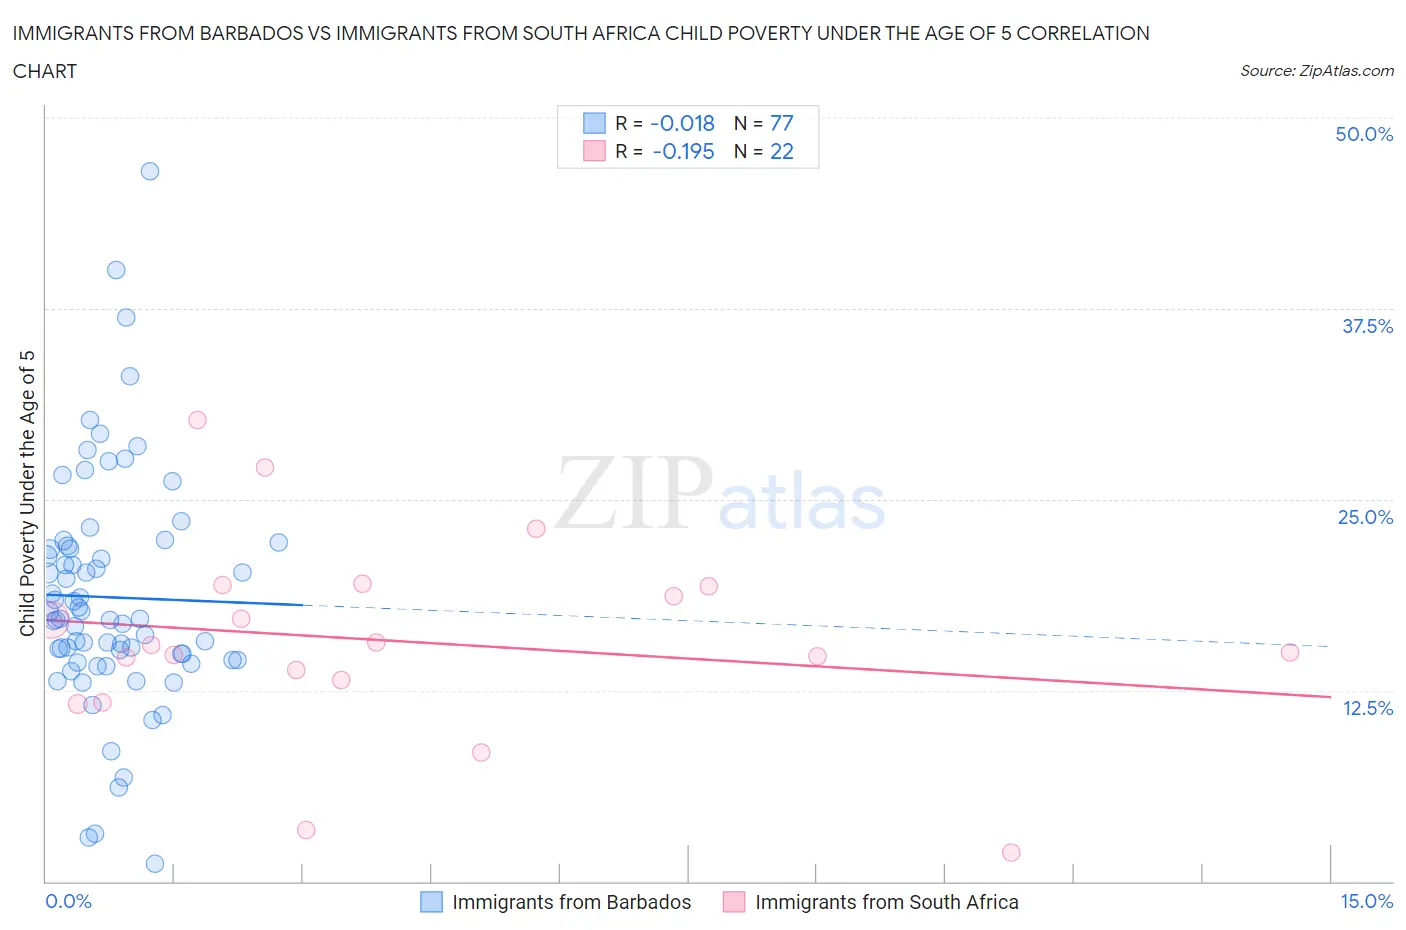 Immigrants from Barbados vs Immigrants from South Africa Child Poverty Under the Age of 5